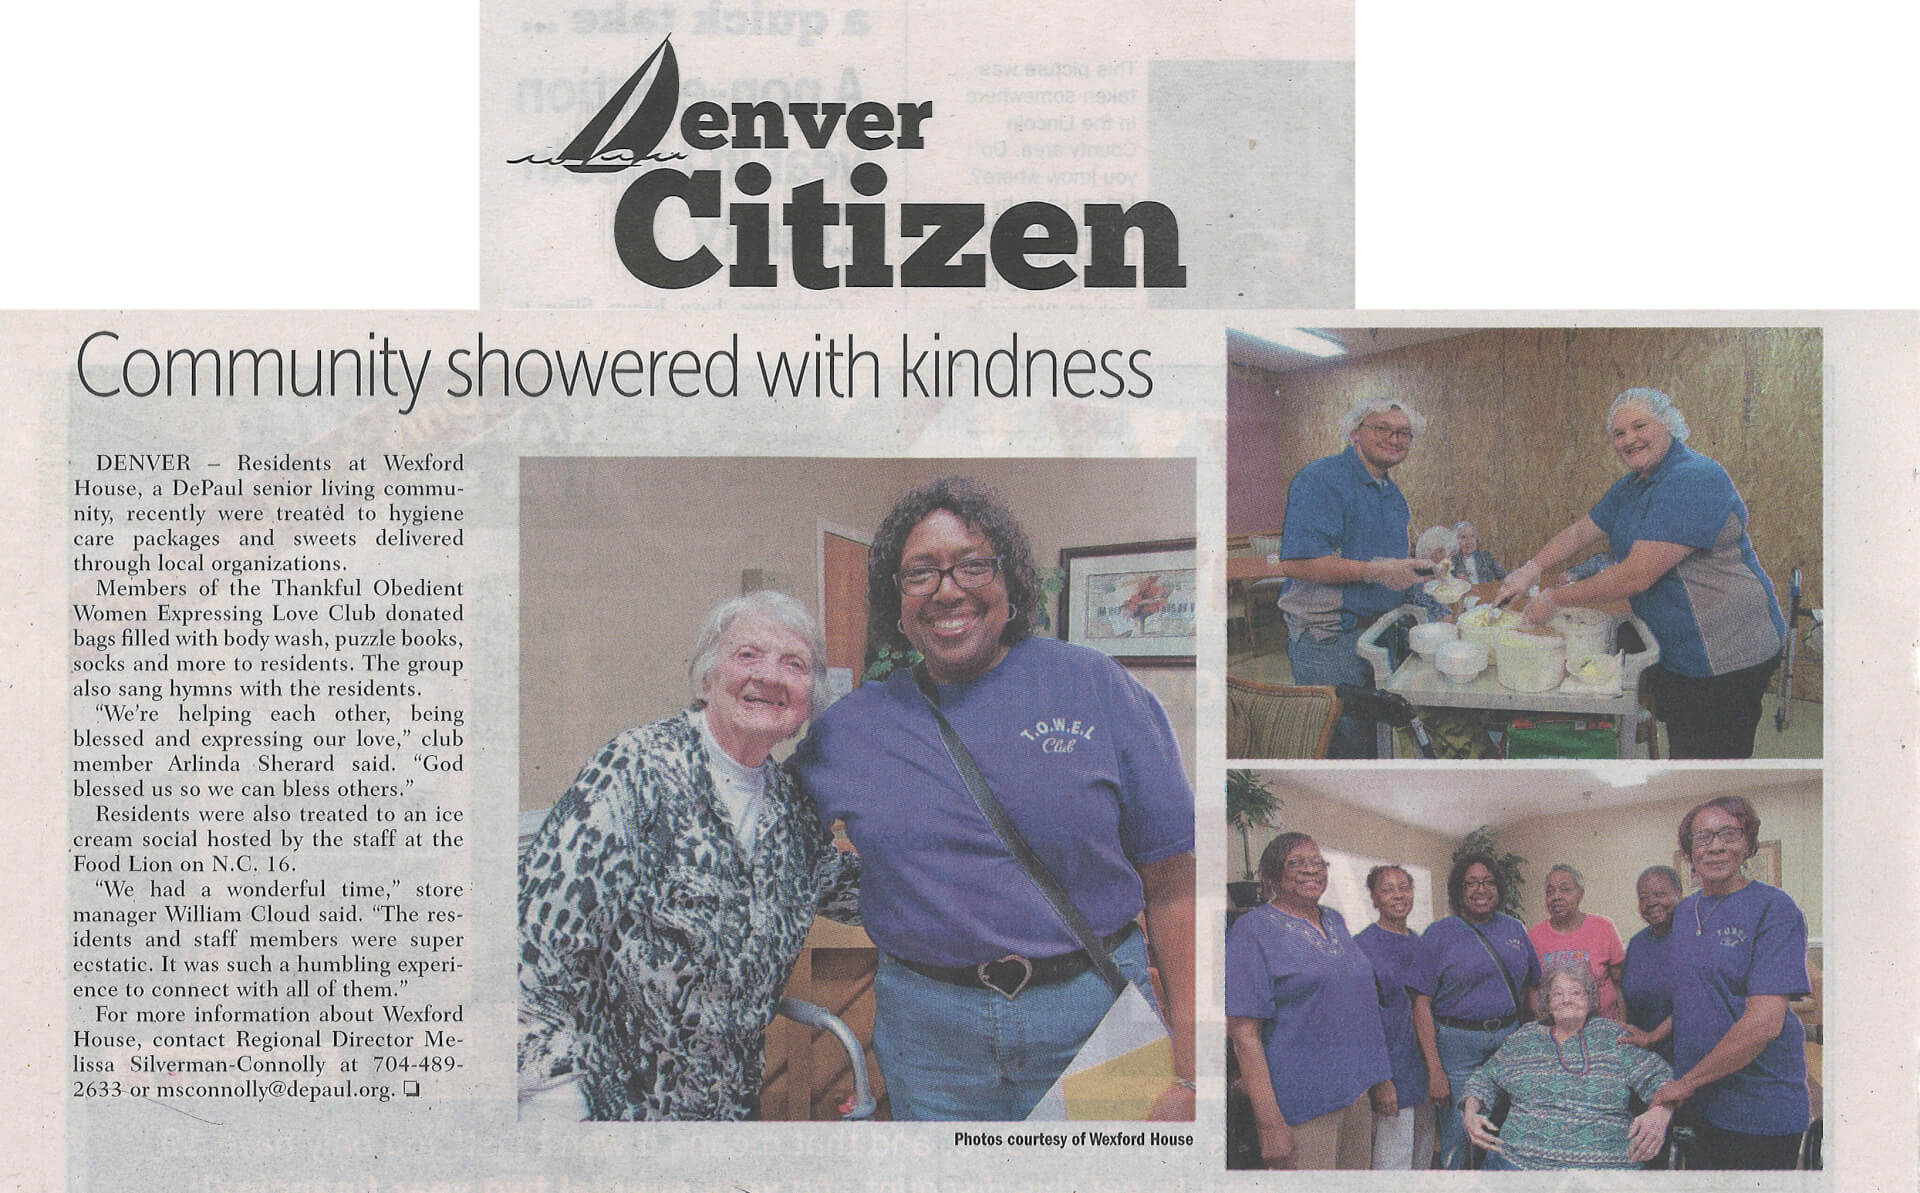 Wexford House Acts Of Kindness, 7.10.19 Denver Citizen